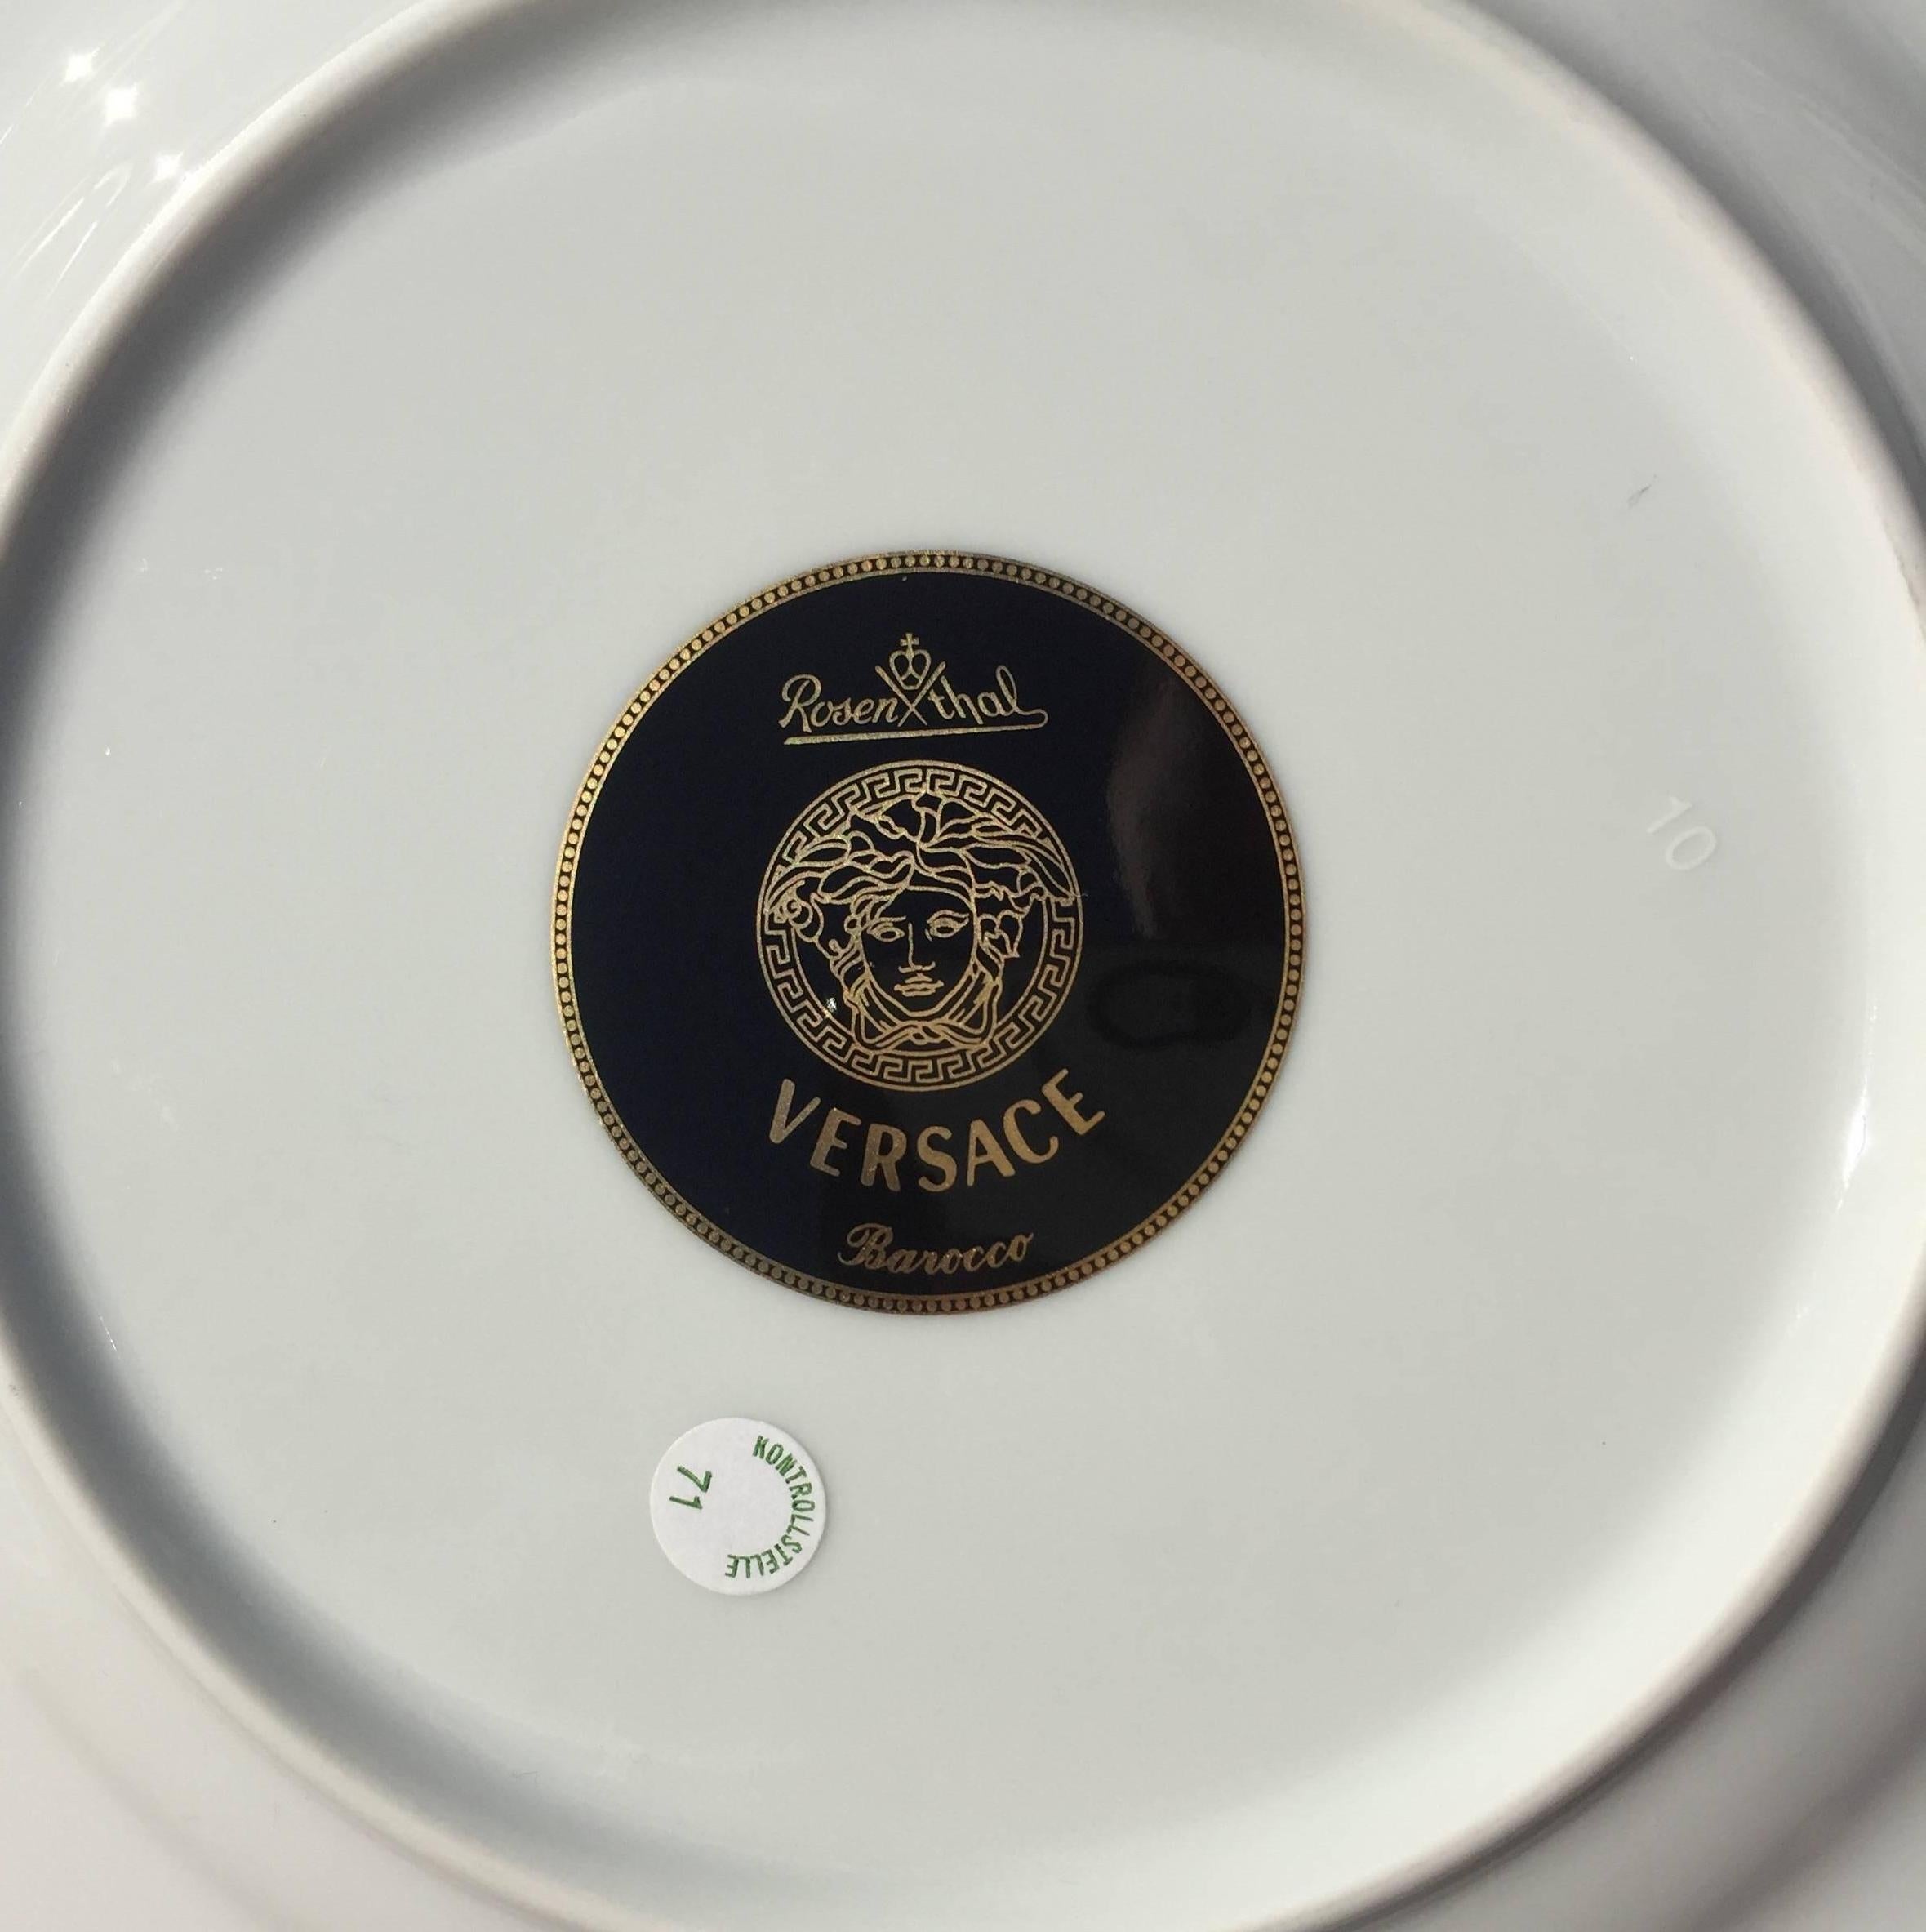 One Rosenthal porcelain salad plate in the 